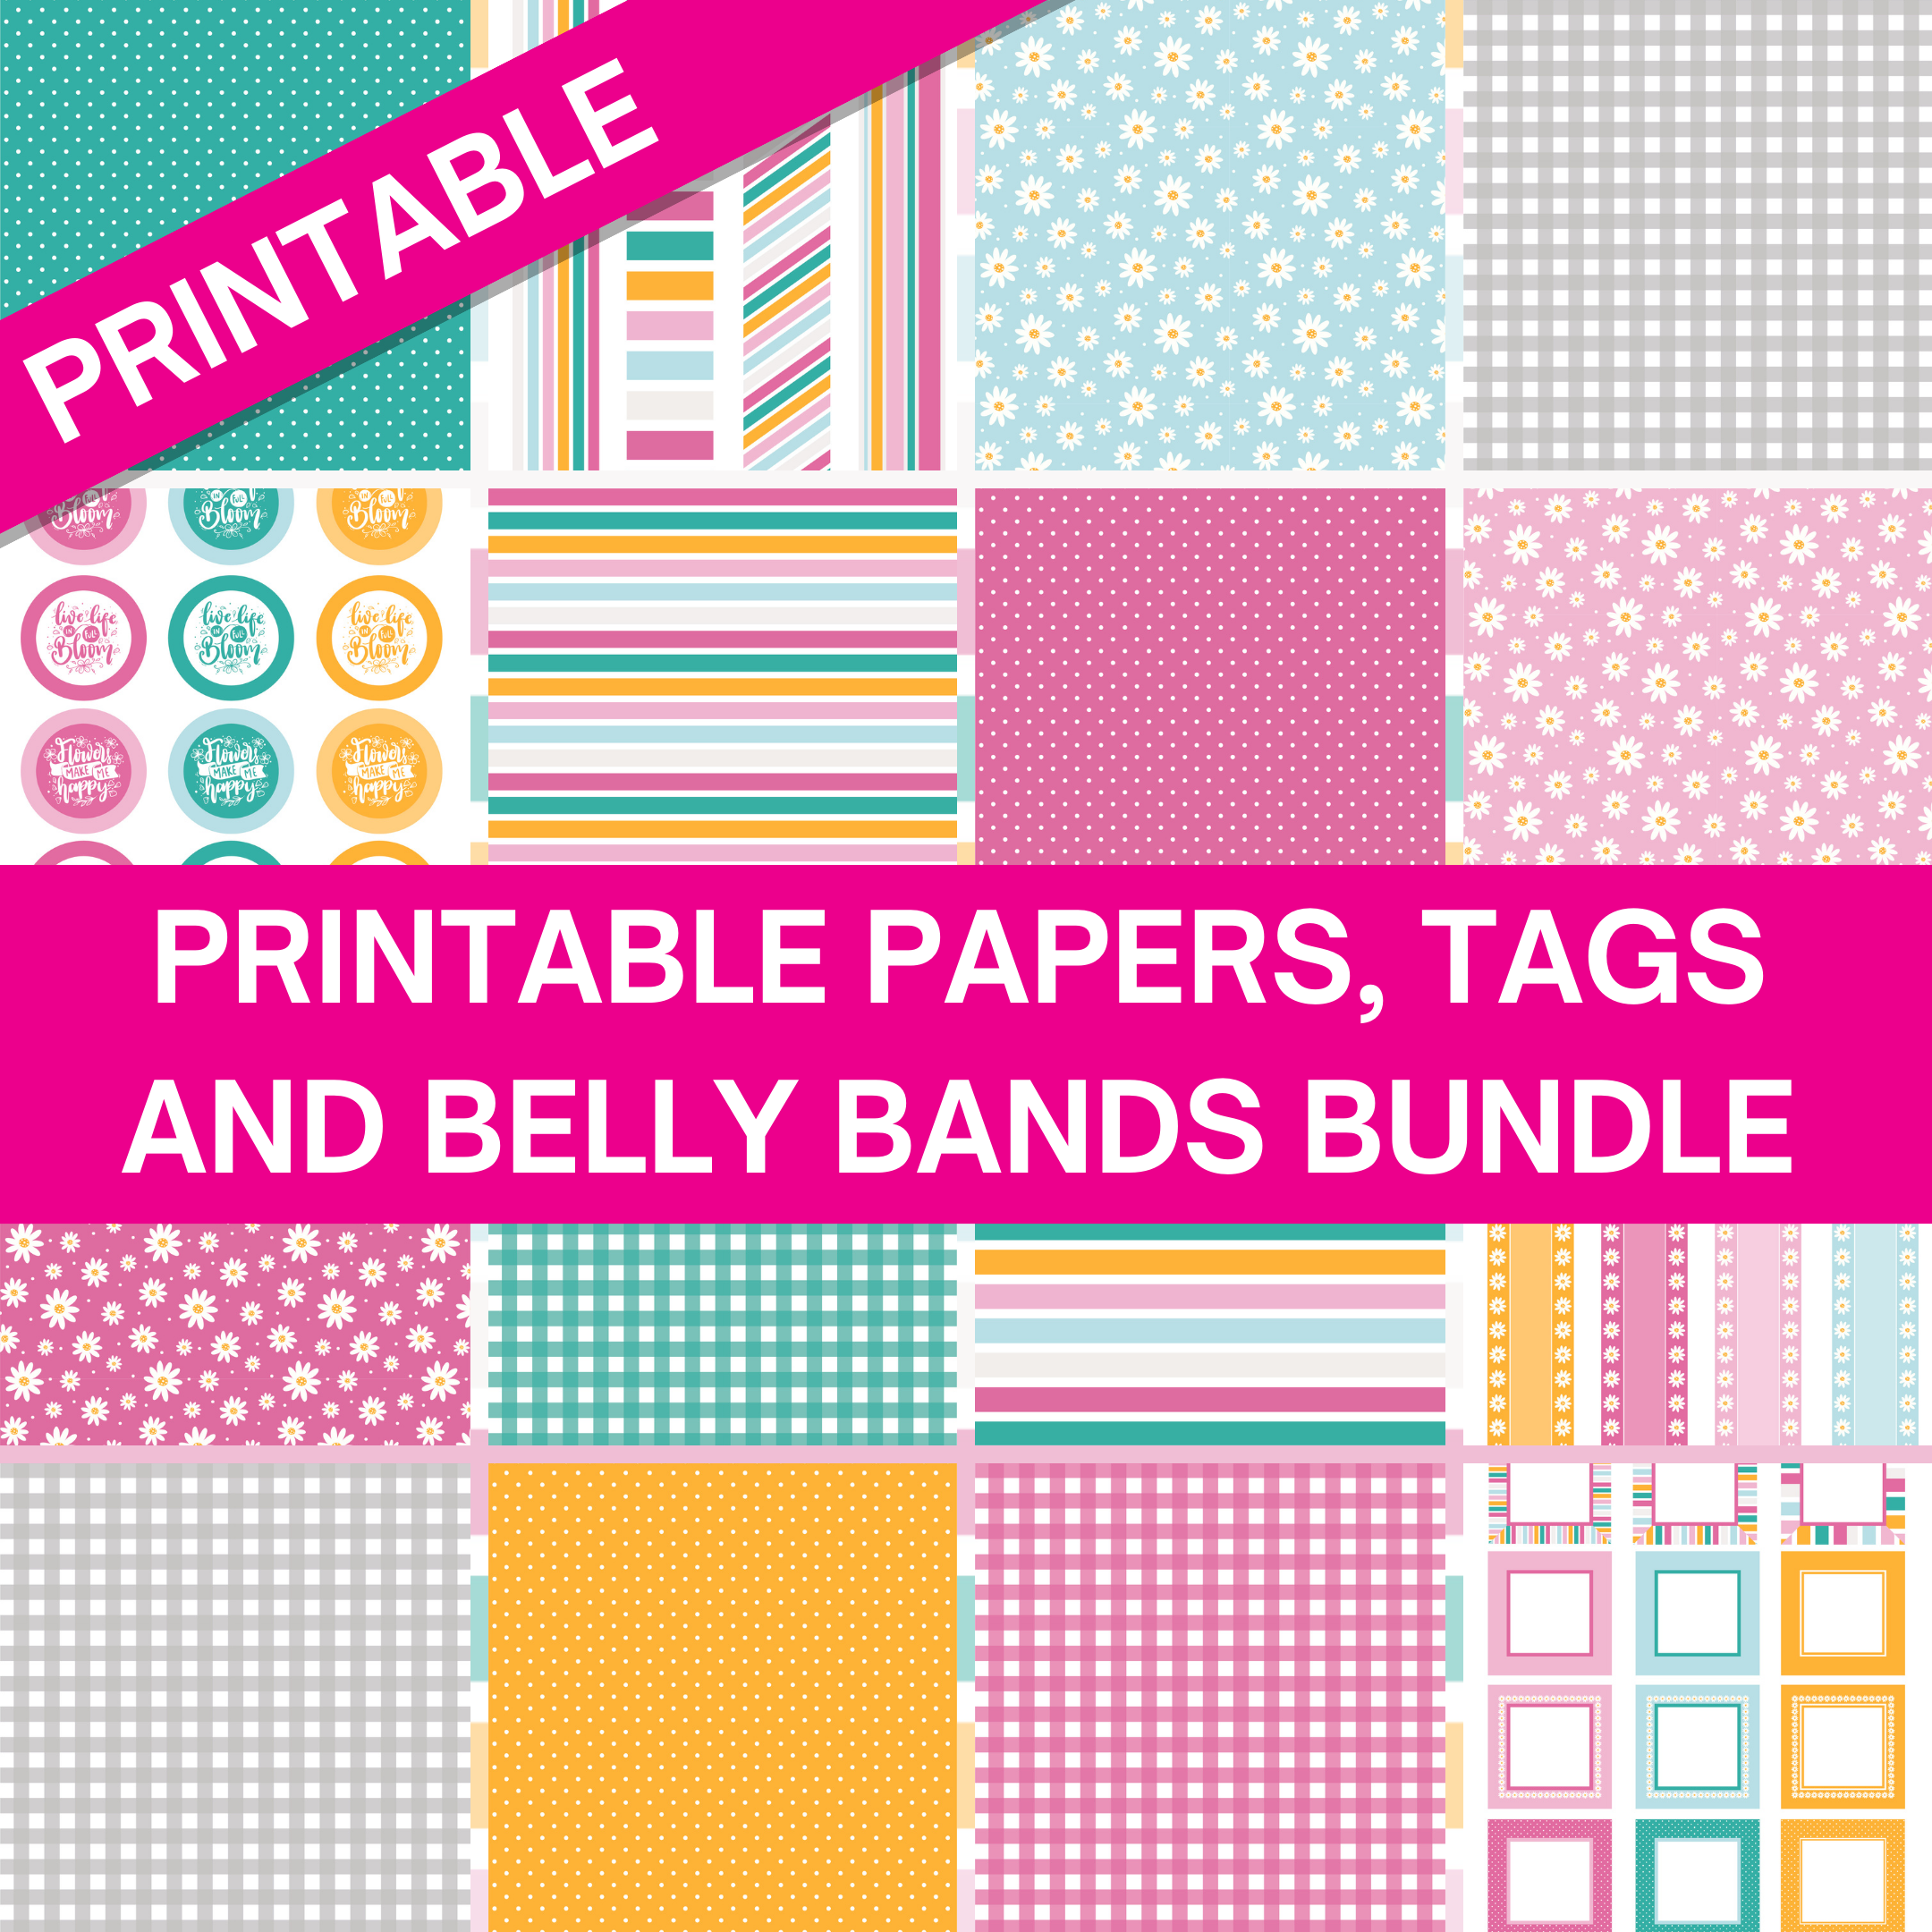 Spring Bloom Printables - Pattern Papers, Tags and Belly Bands MEGA BUNDLE